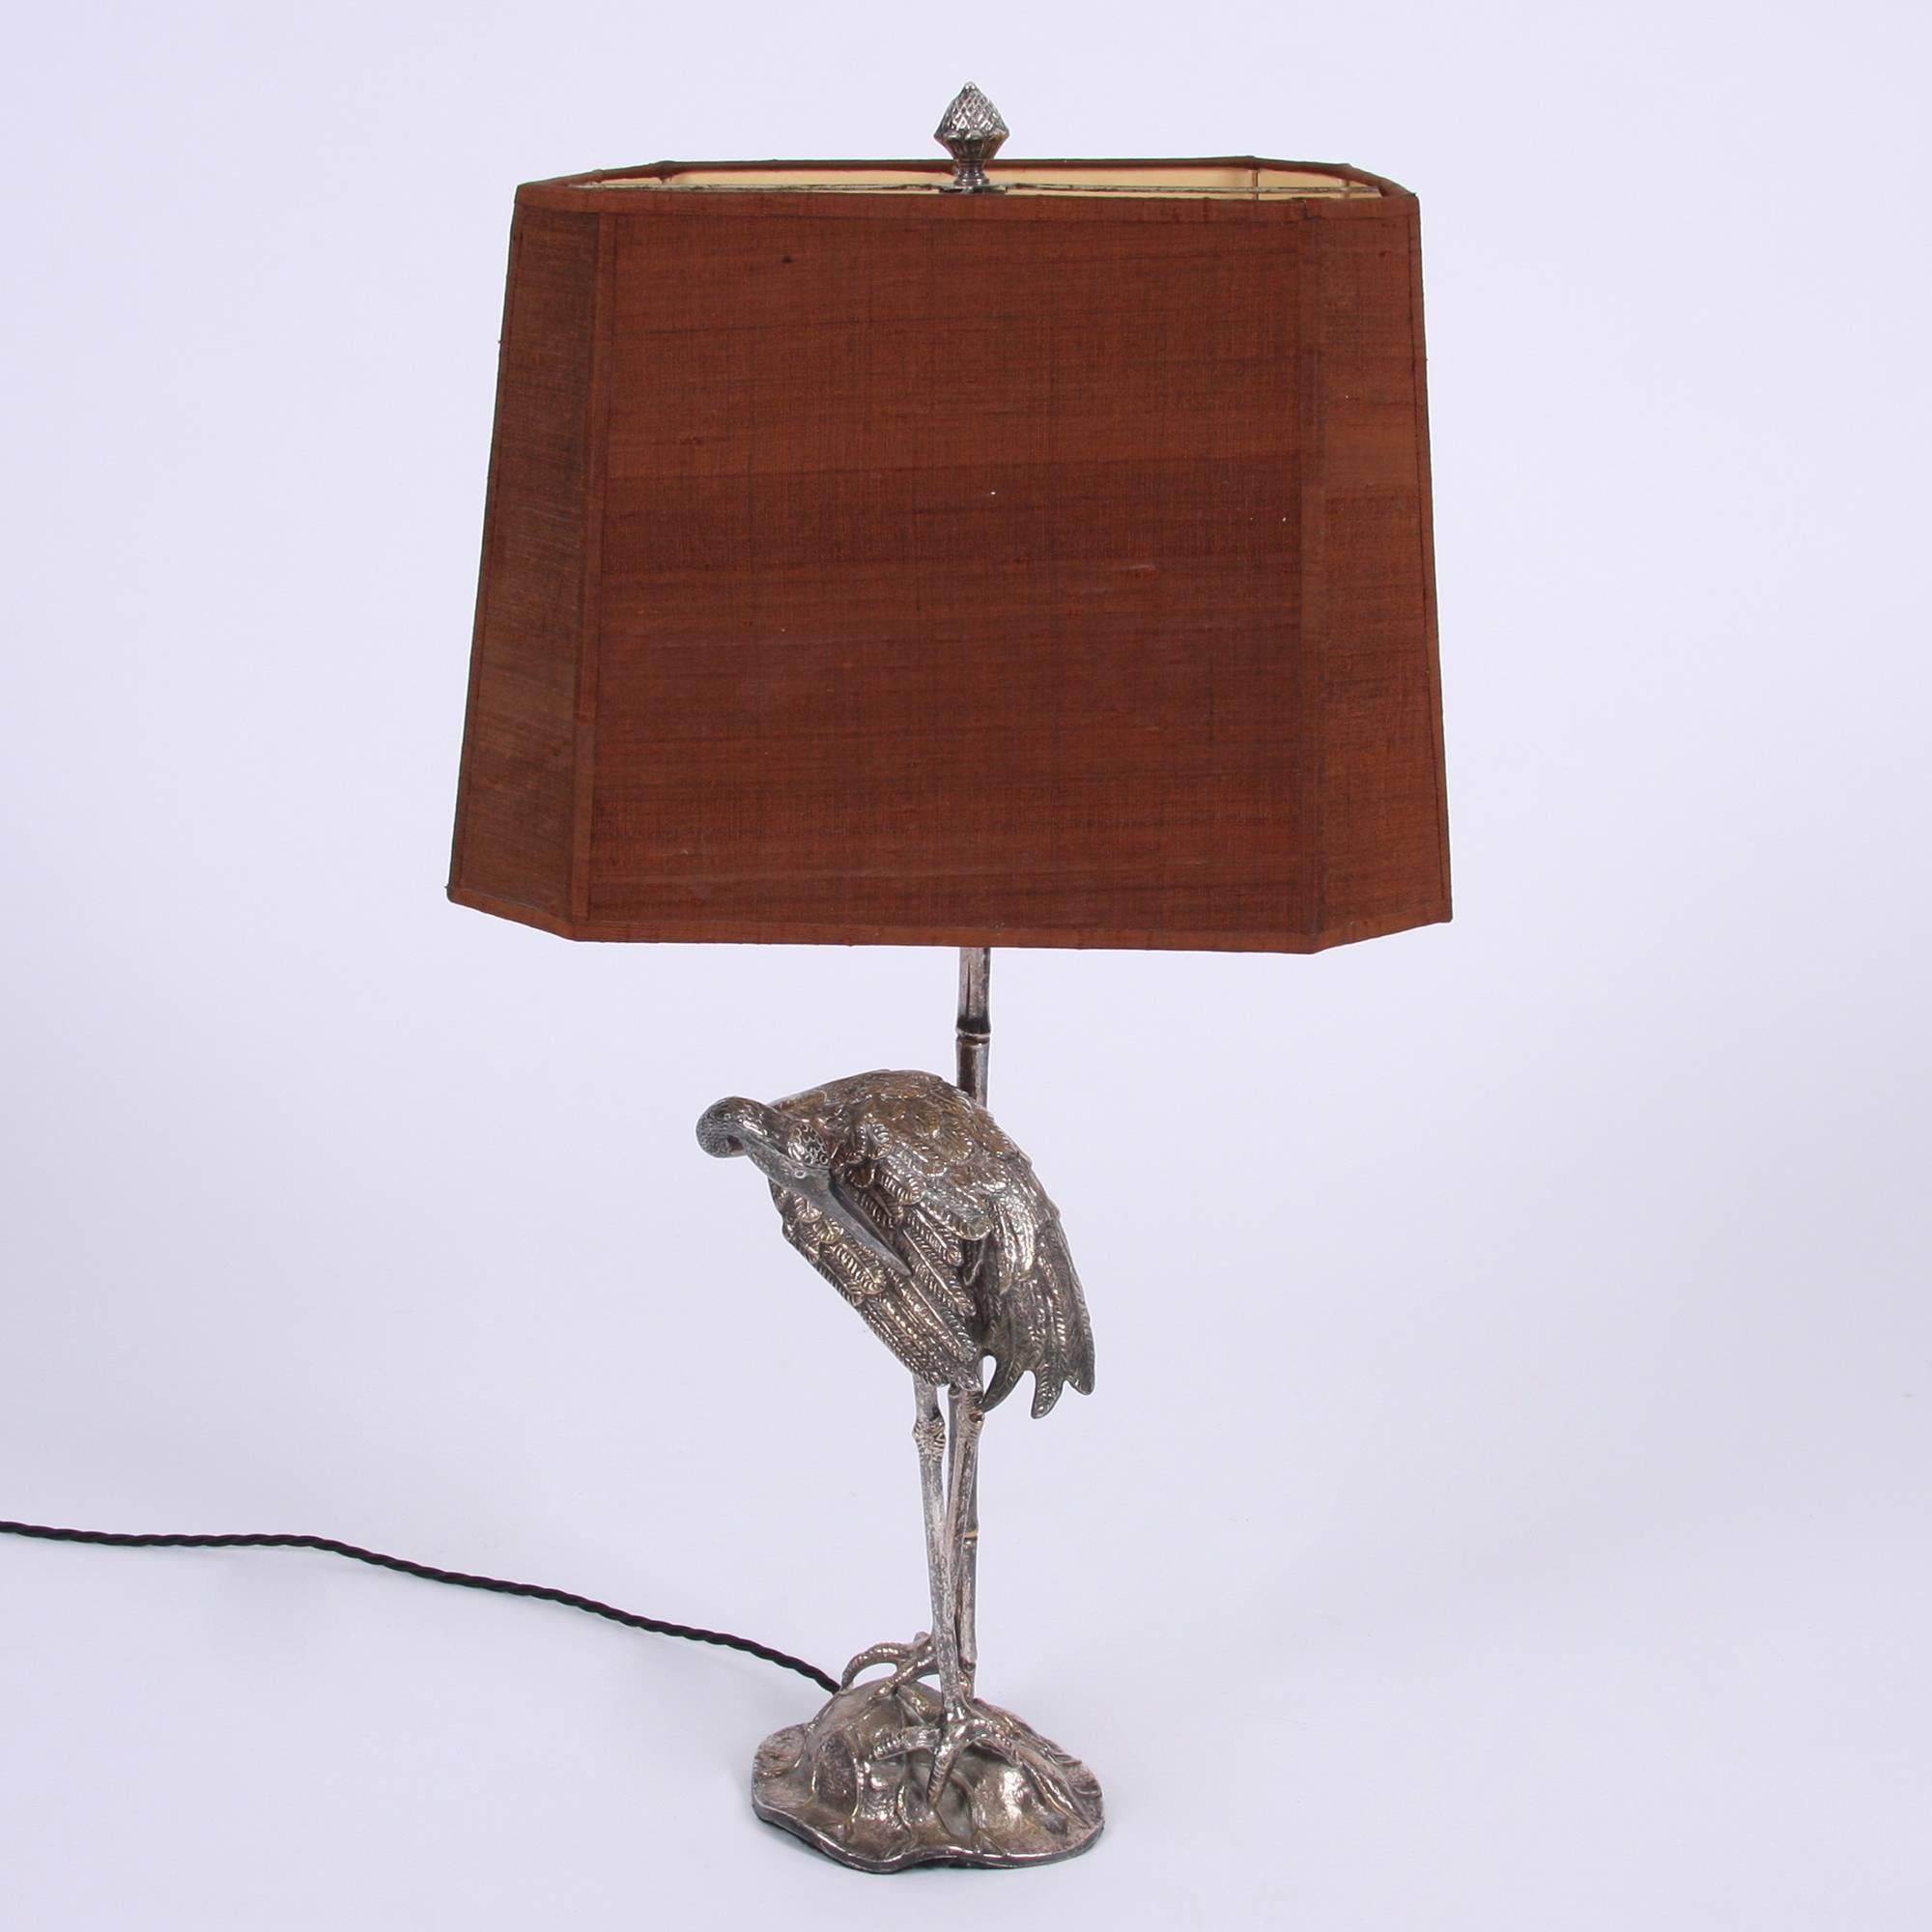 Spanish c.1960

Stunning table lamp with bamboo column and stork. Silver plated. Shown with original shade. Rewired and PAT tested. 